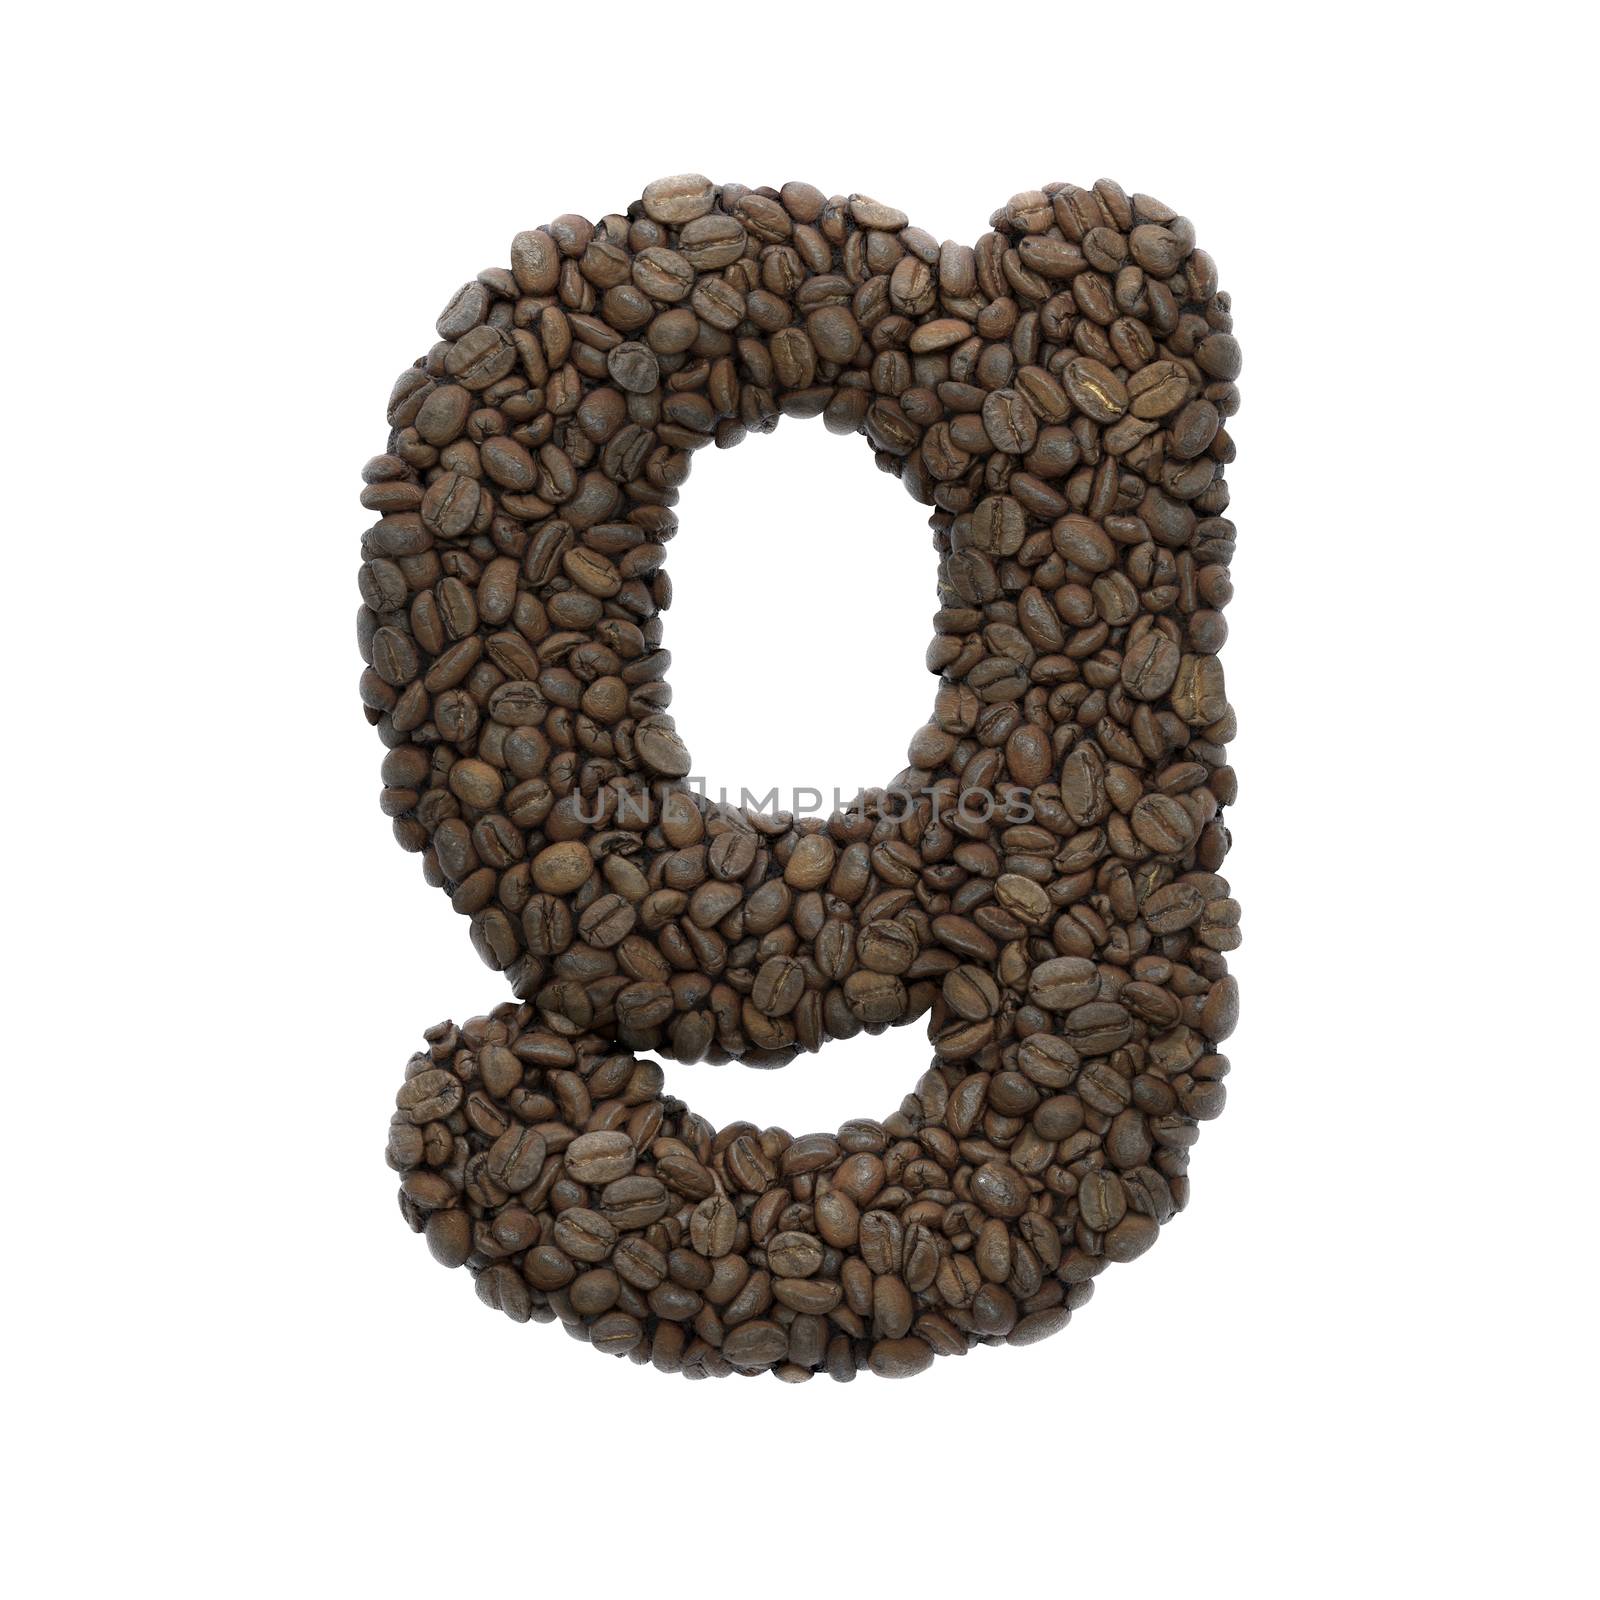 Coffee letter G - Lowercase 3d roasted beans font isolated on white background. This alphabet is perfect for creative illustrations related but not limited to Coffee, energy, insomnia...